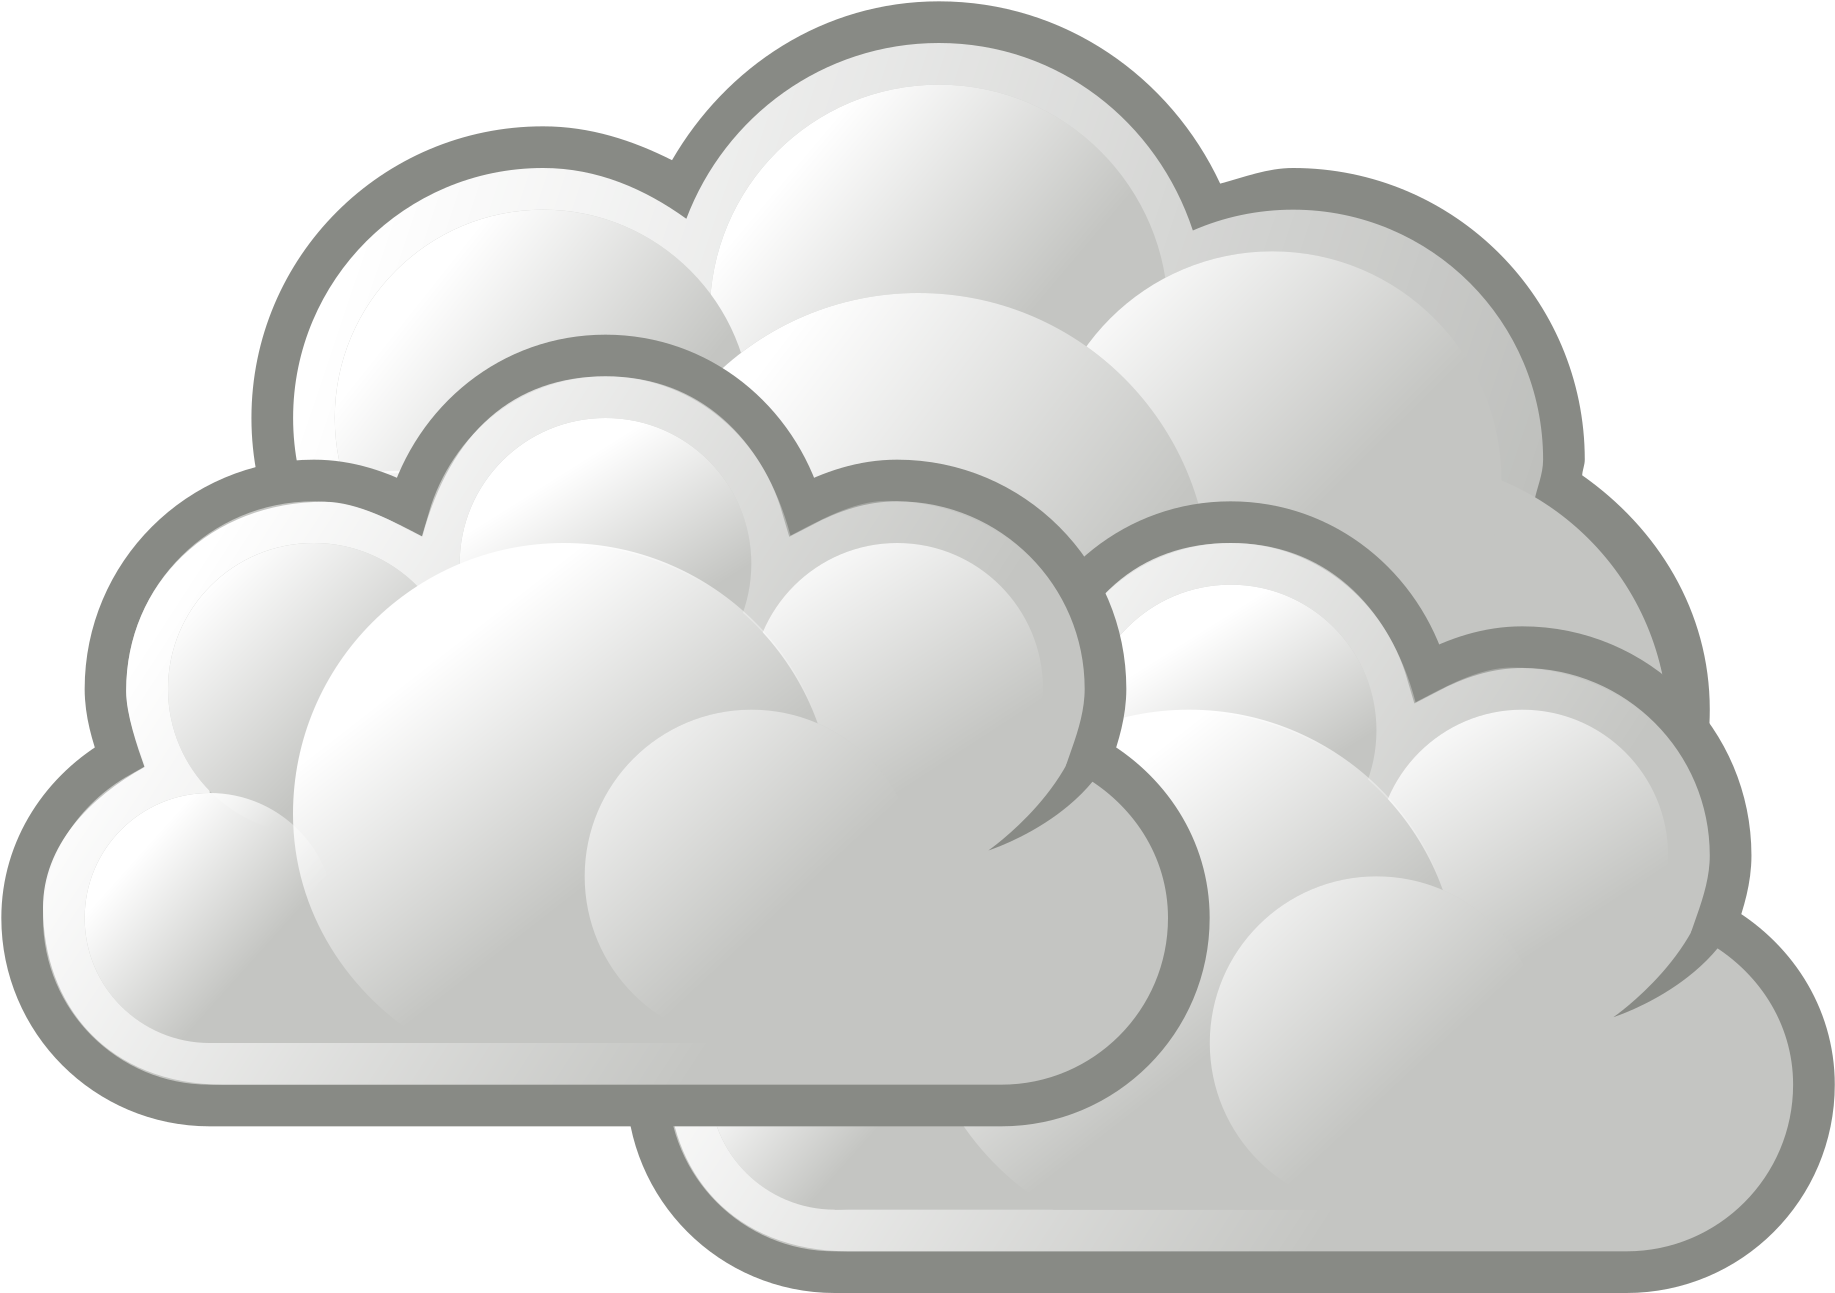 Cloudy_ Weather_ Illustration.png PNG image